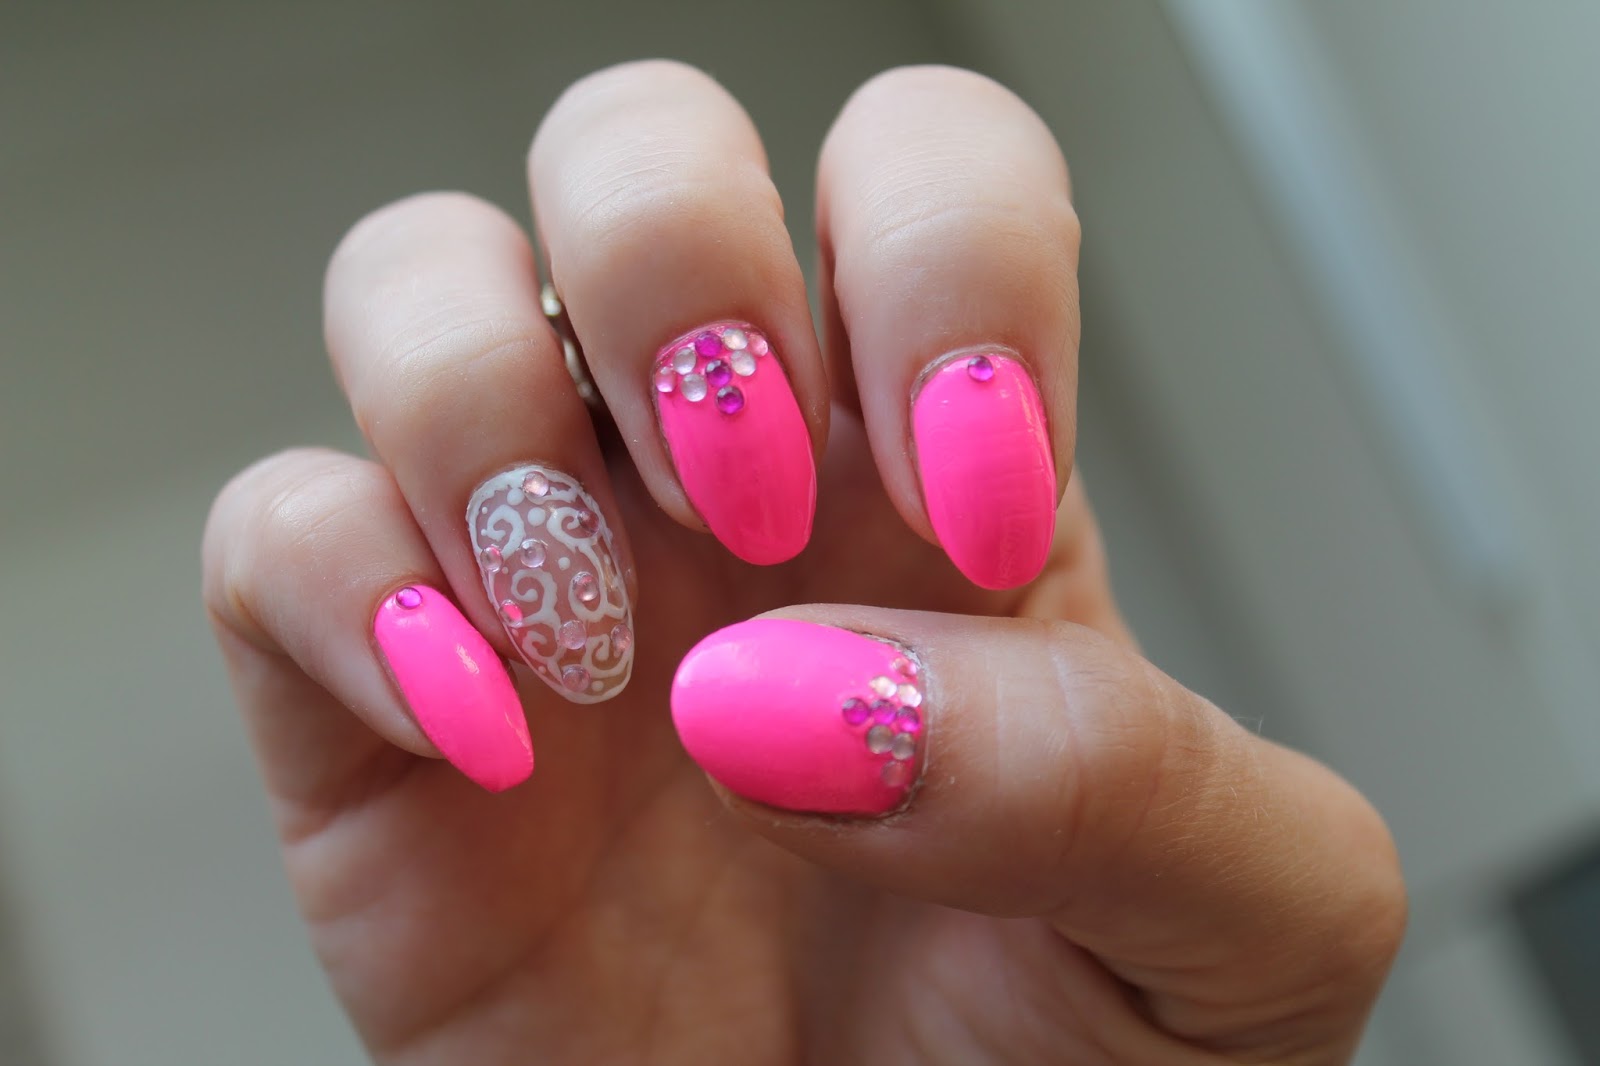 8. DIY Lace Nail Art with Glitter Accent - wide 3